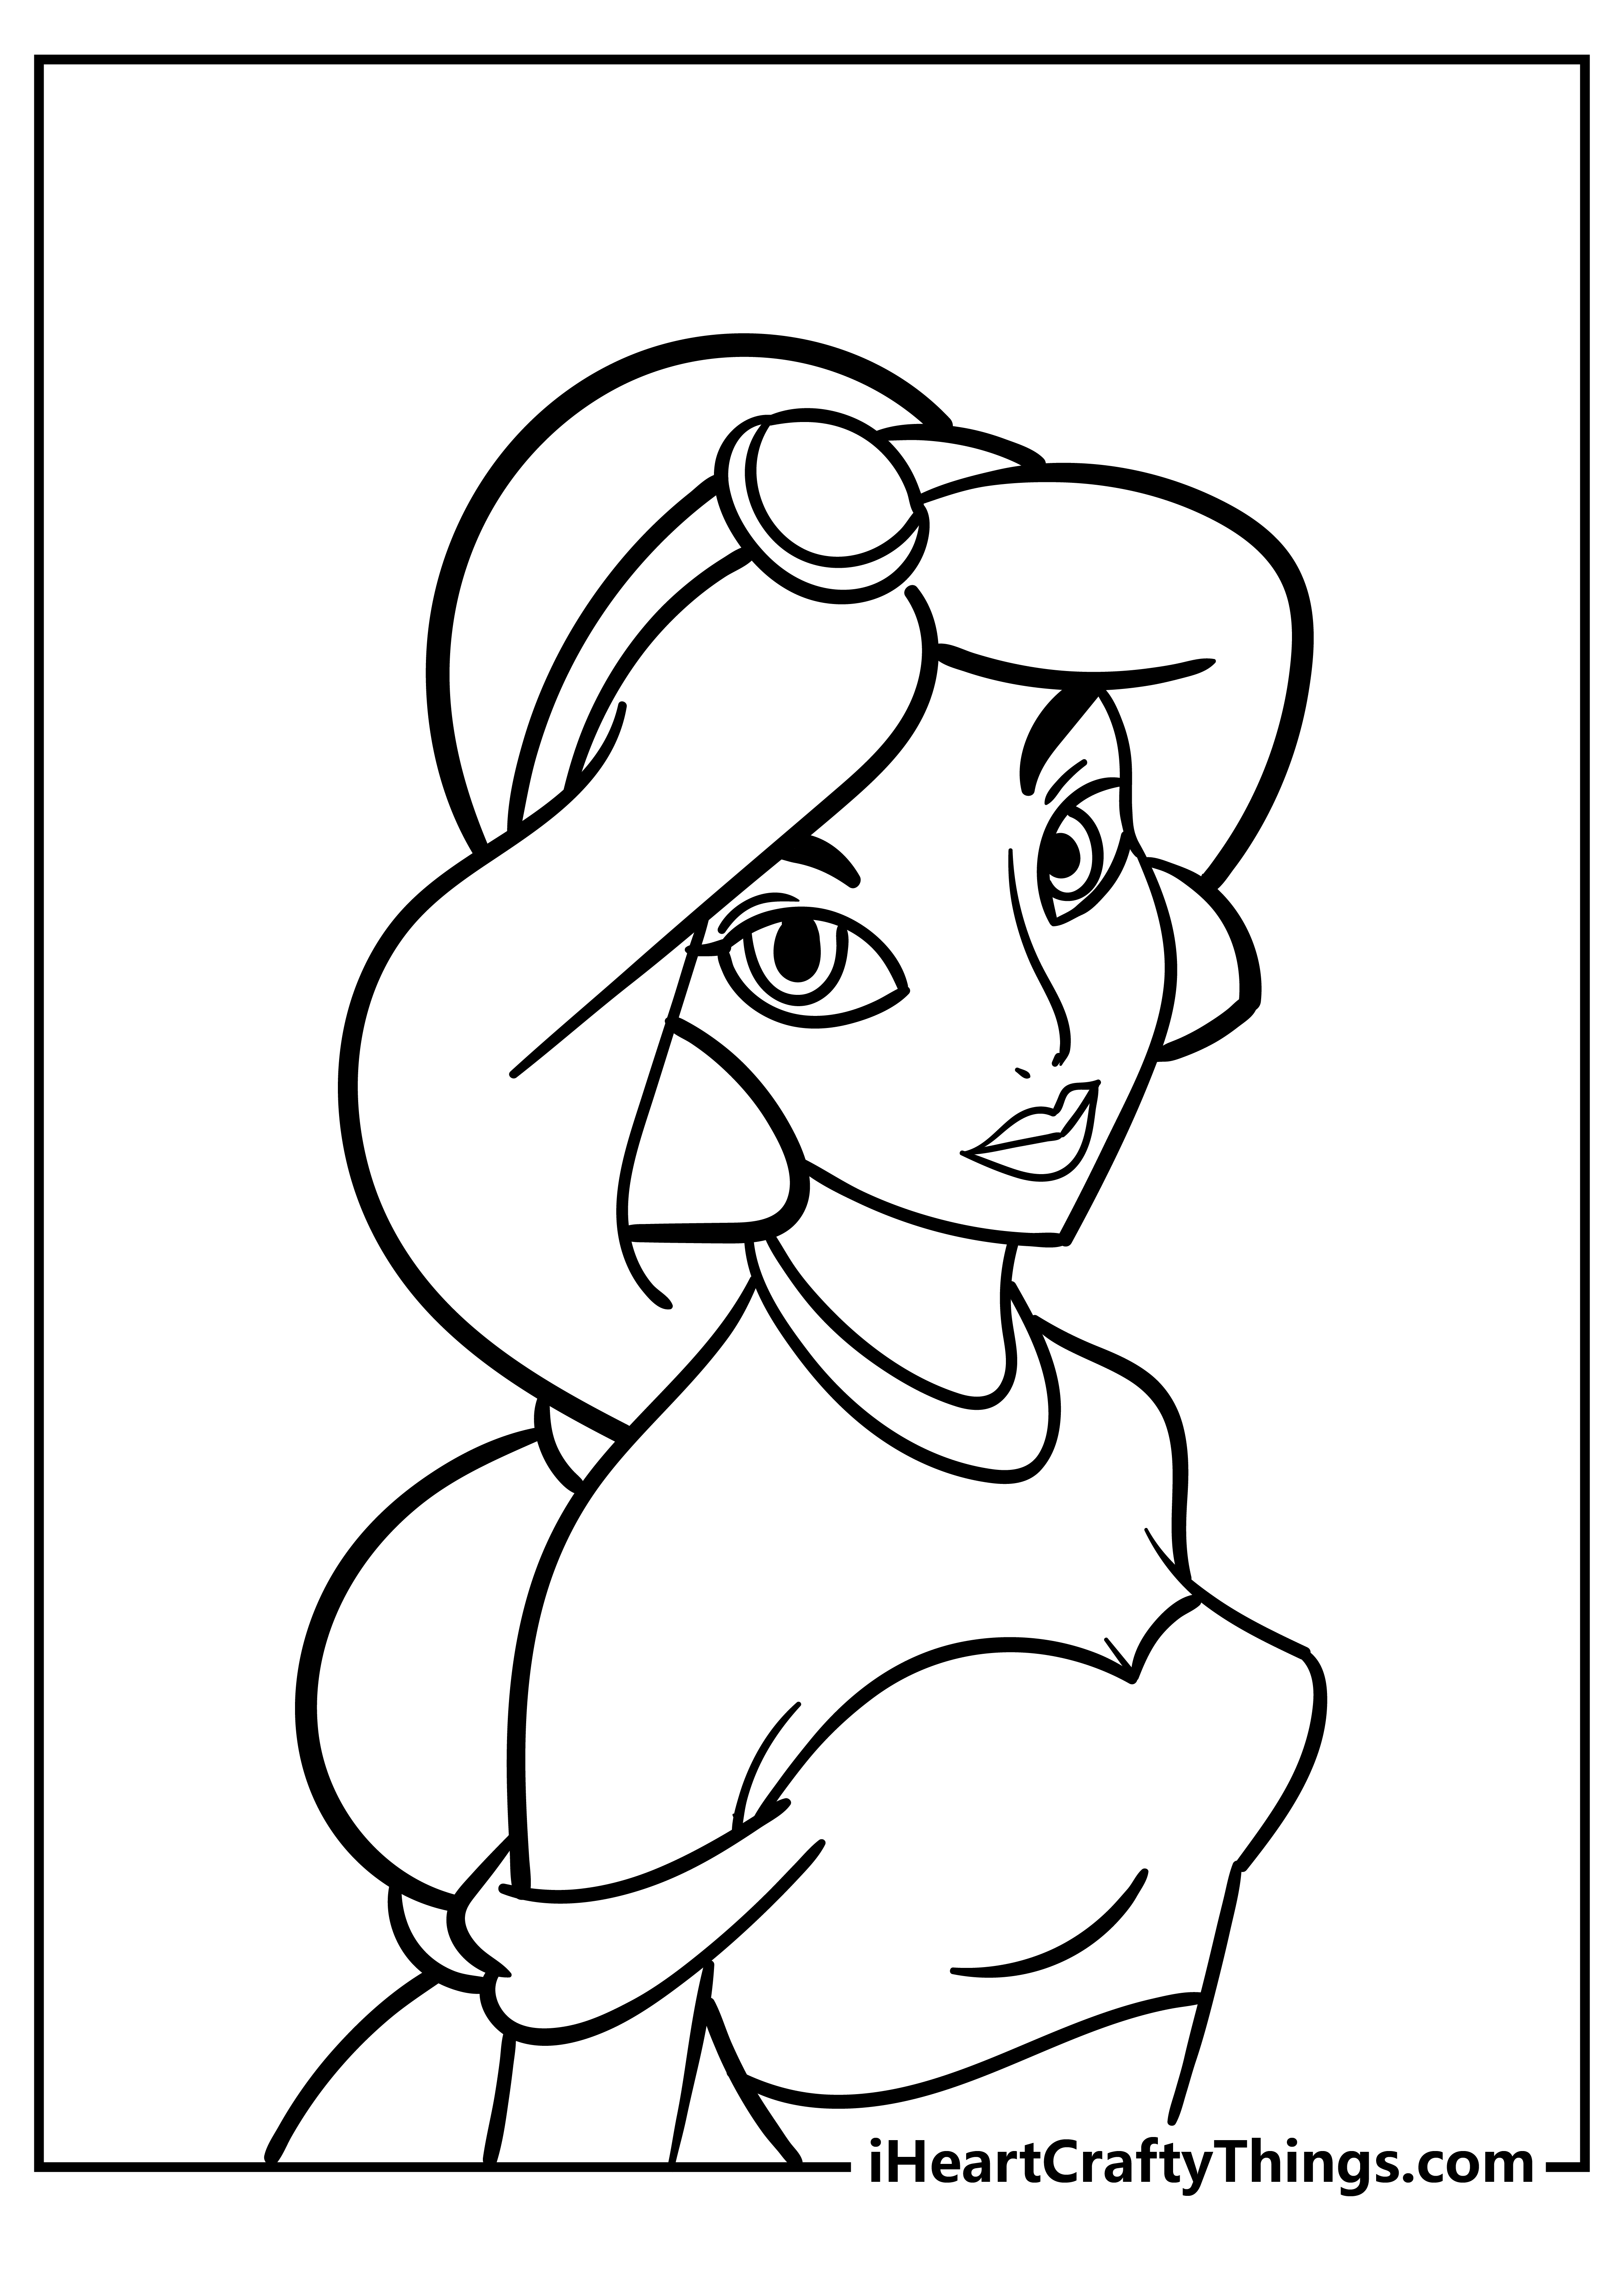 Jasmine Coloring Pages free pdf download